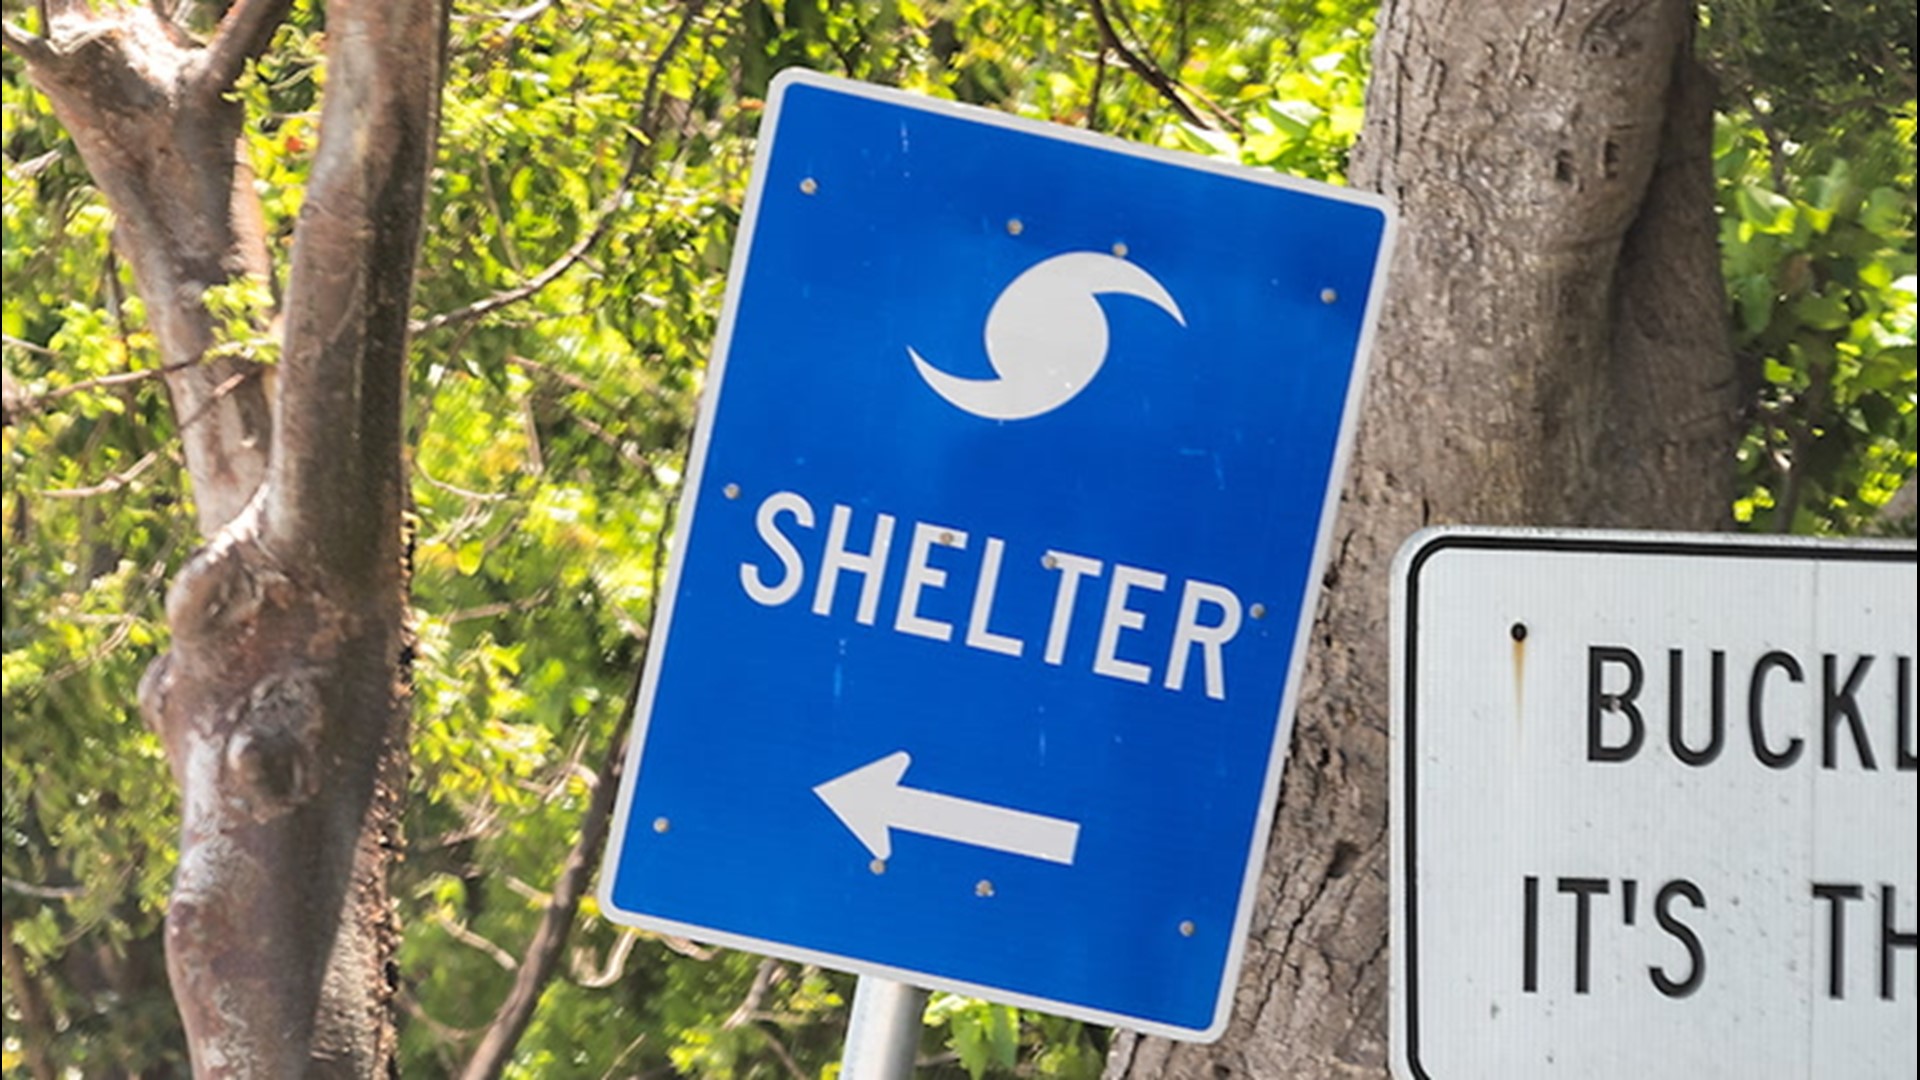 If you're in the direct path of a hurricane and need to seek shelter, here's how you can maintain social distancing while taking refuge.